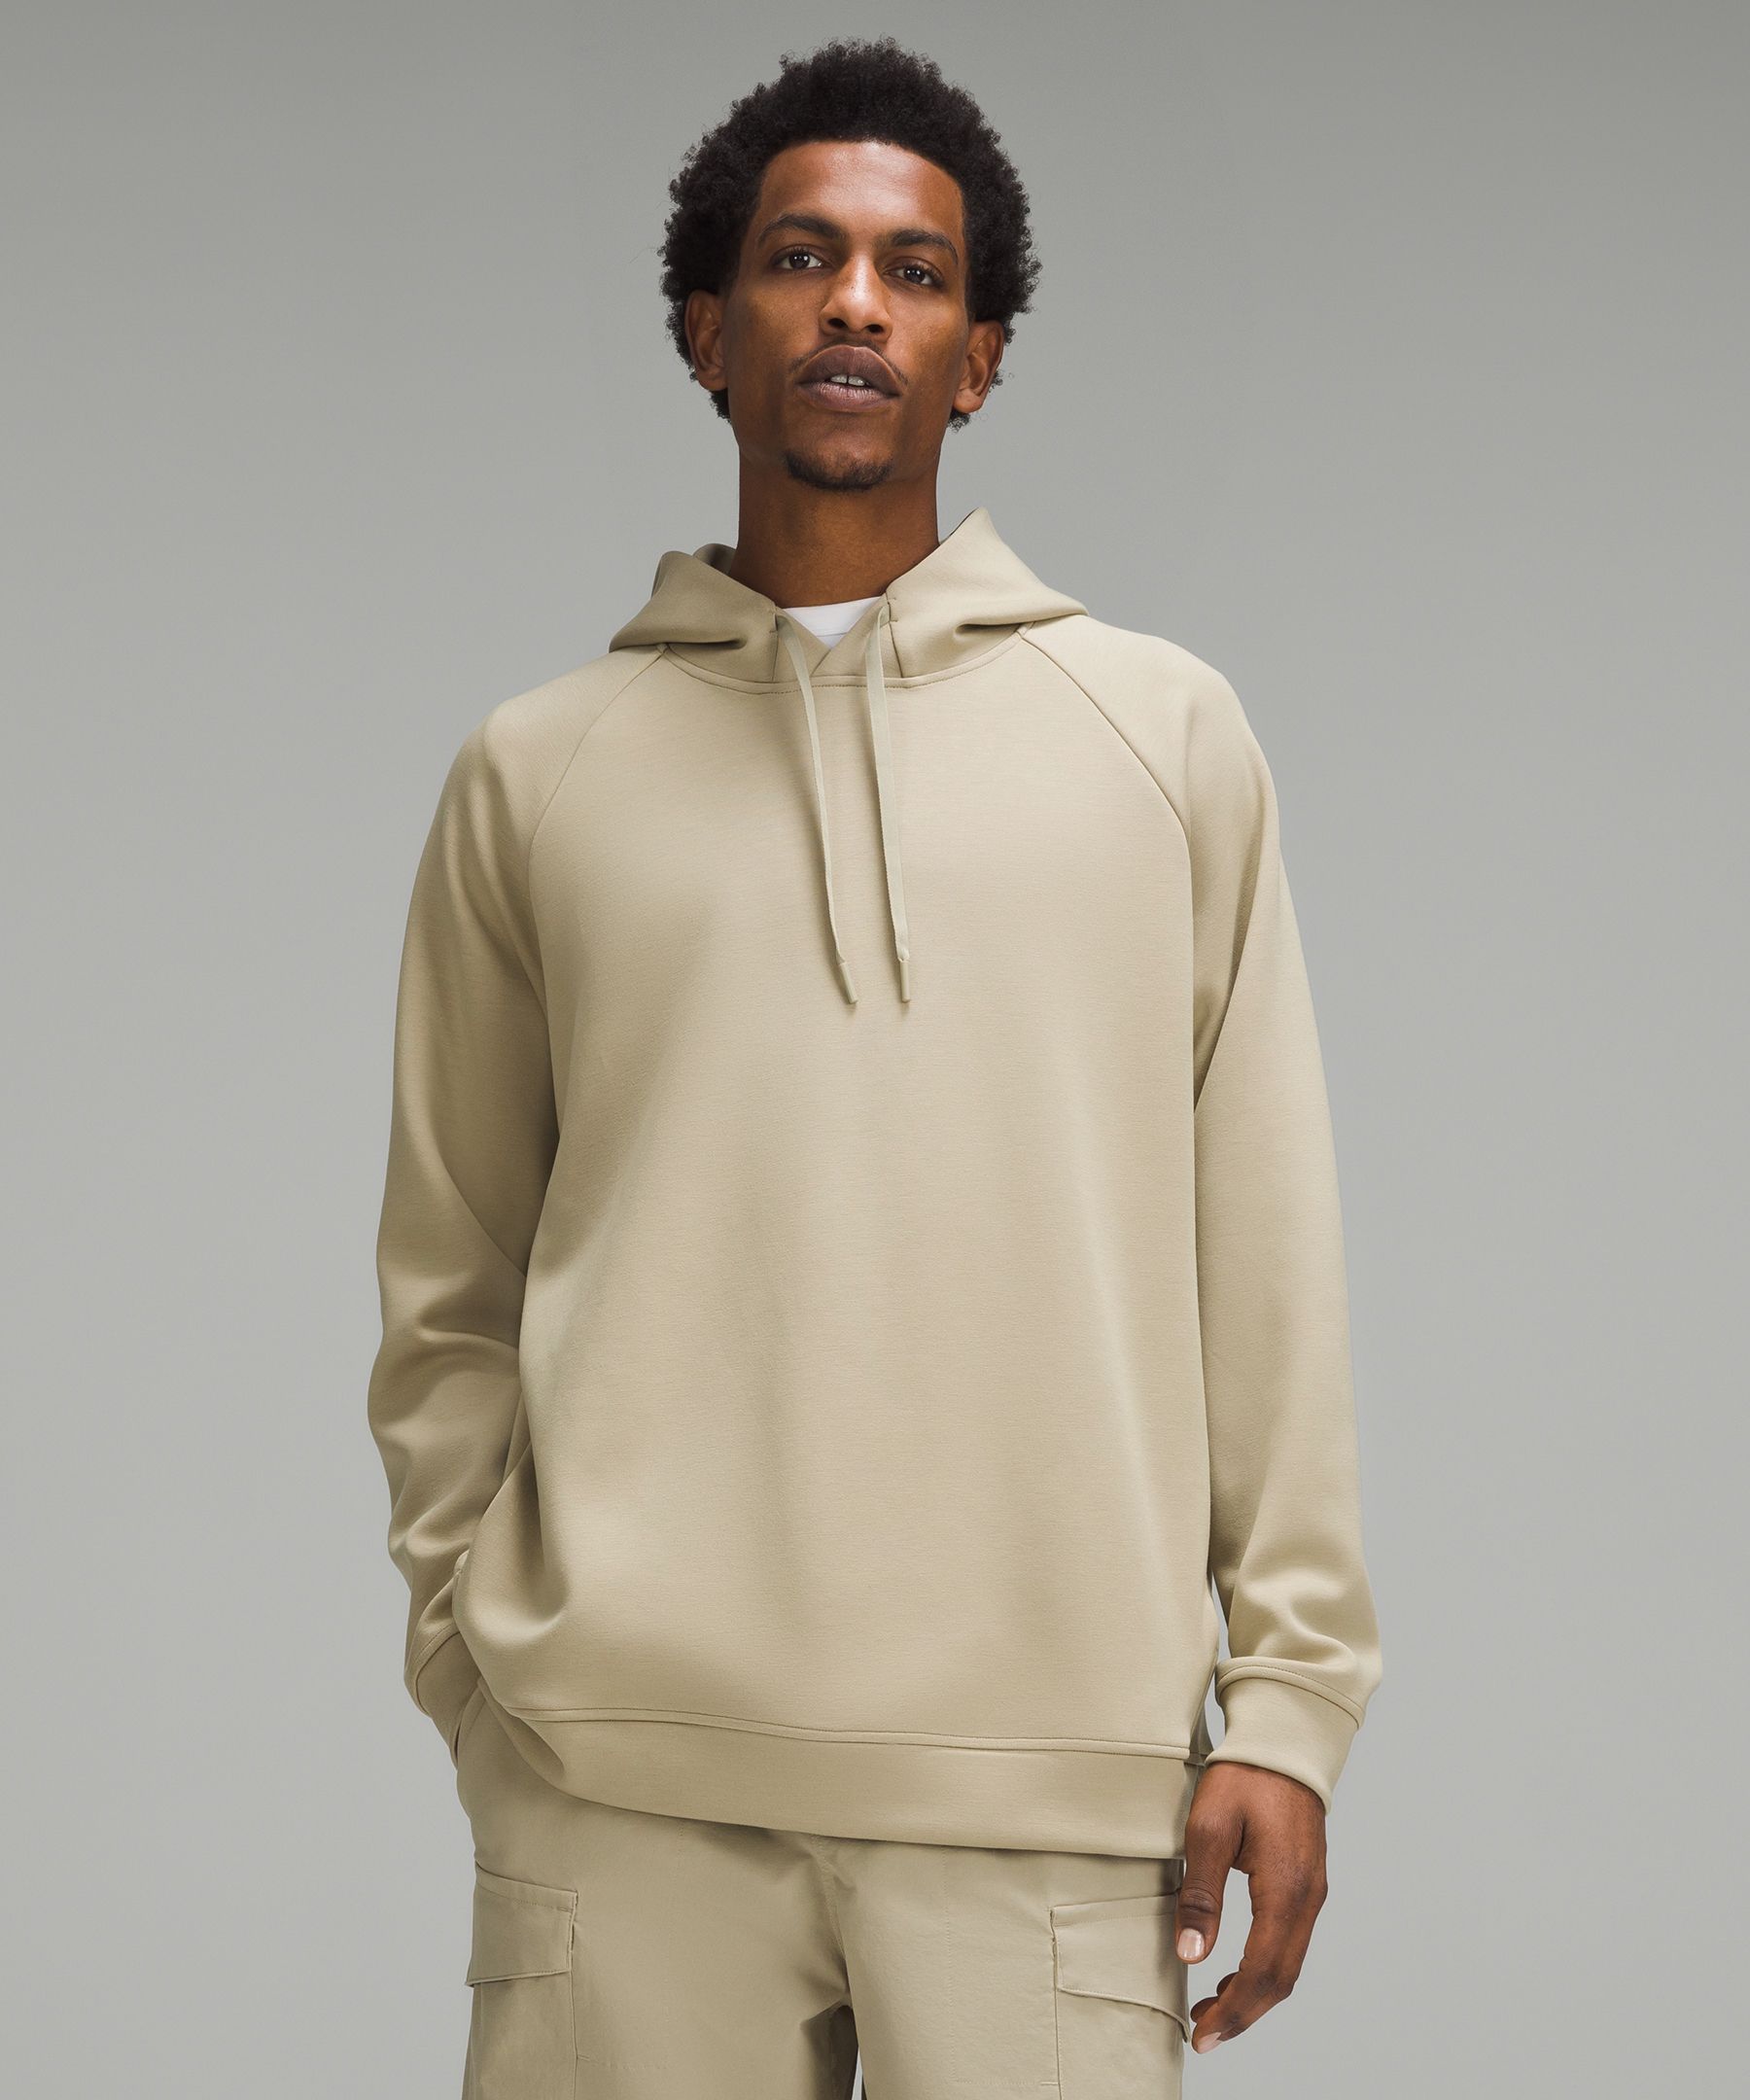 Men's Summer Hoodies and Pullovers